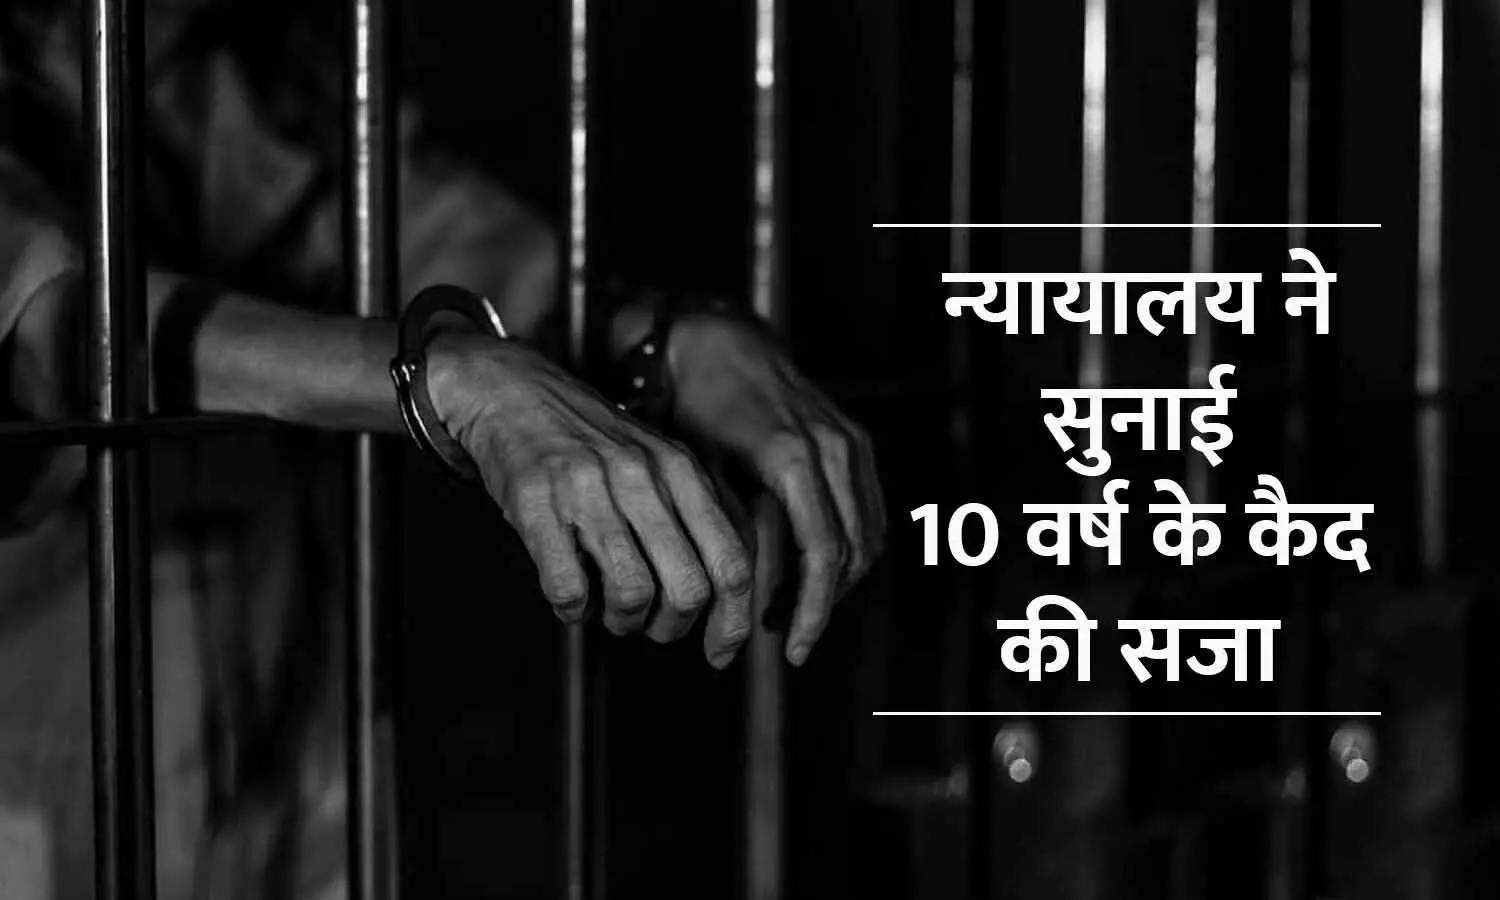 10 years rigorous imprisonment and a fine of one lakh rupees to the accused who sold intoxicating cough syrup in Rewa